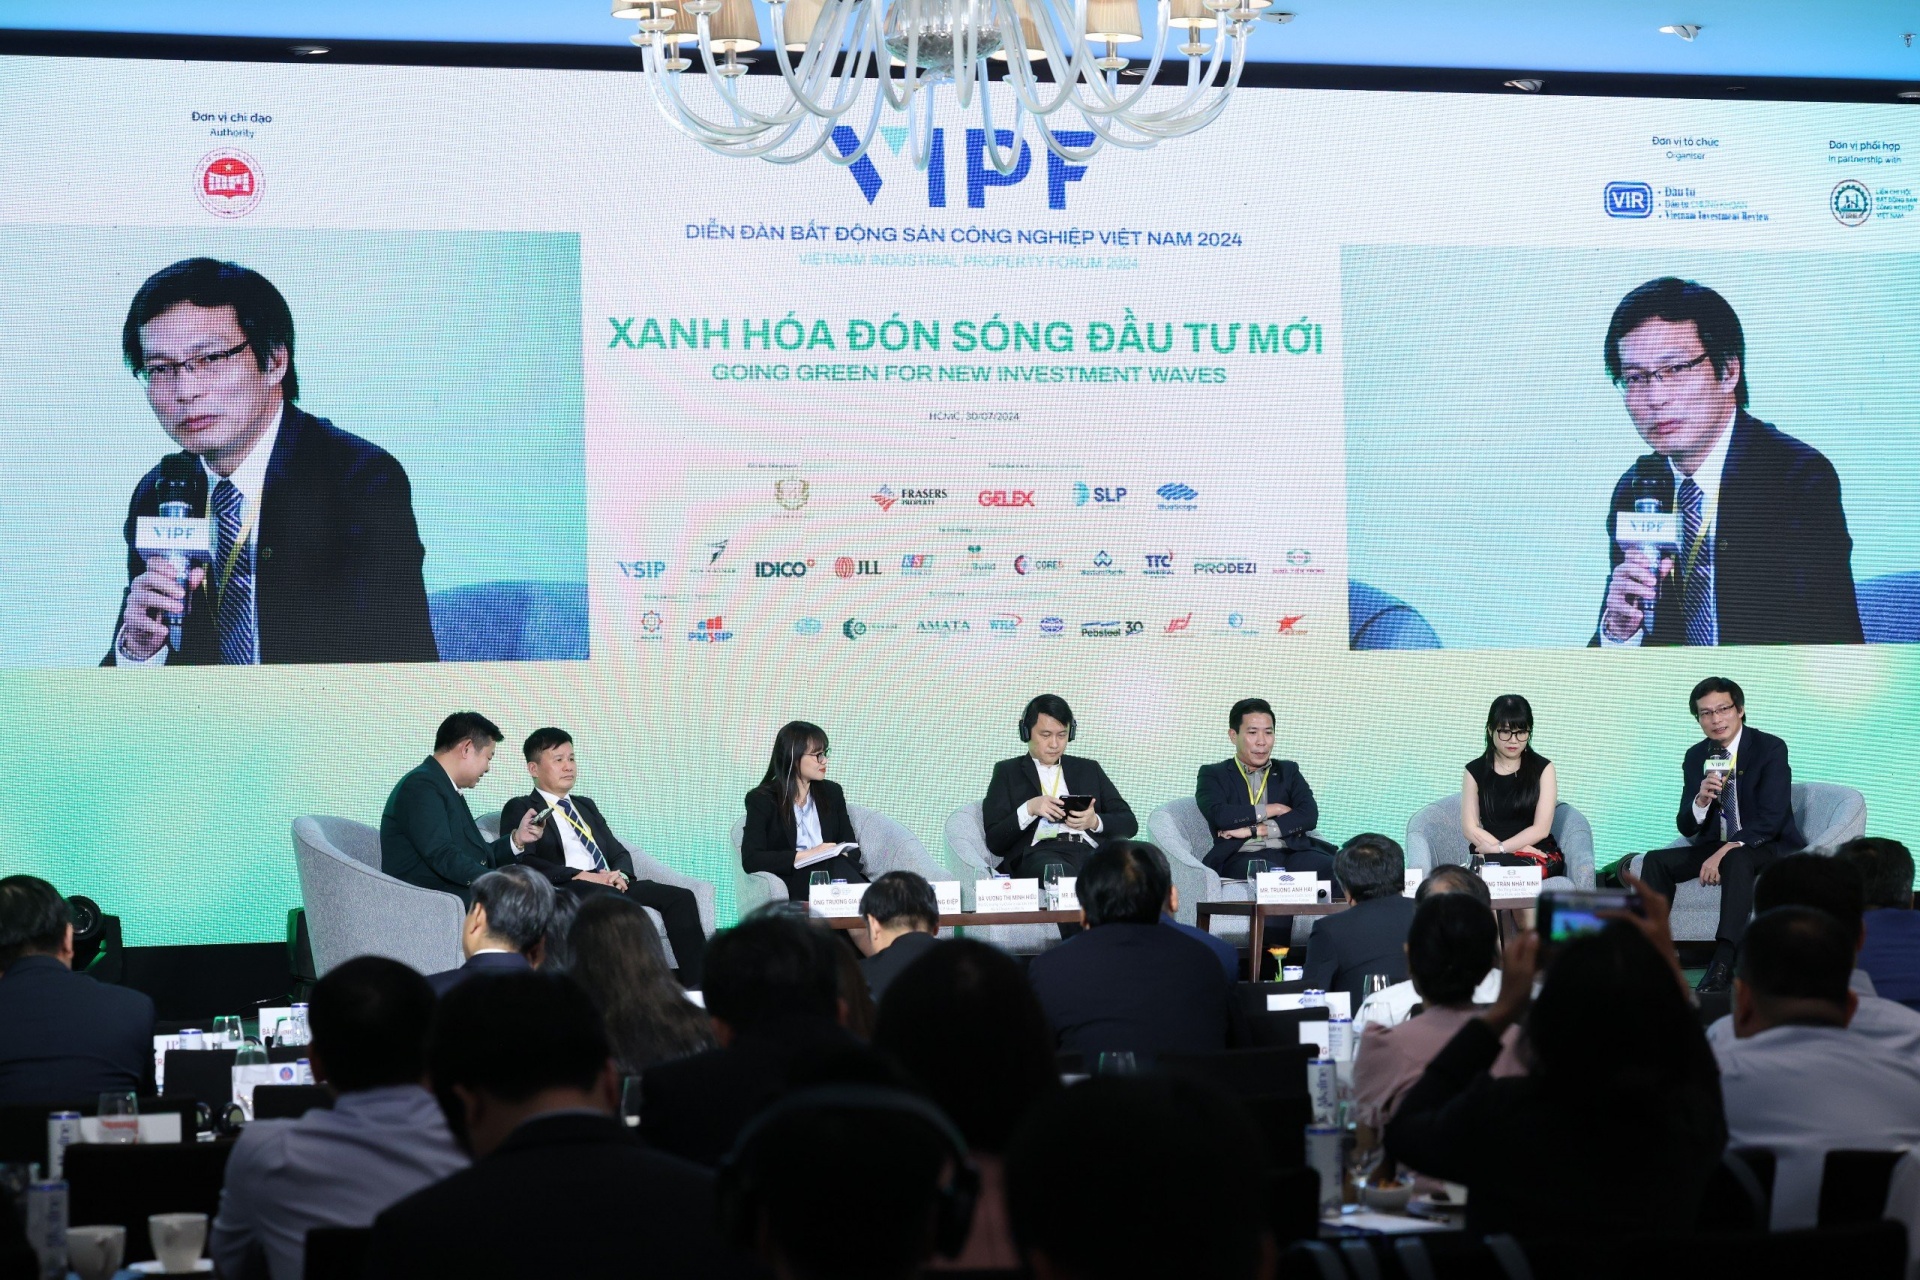 Green transformation in IPs driving new investment waves